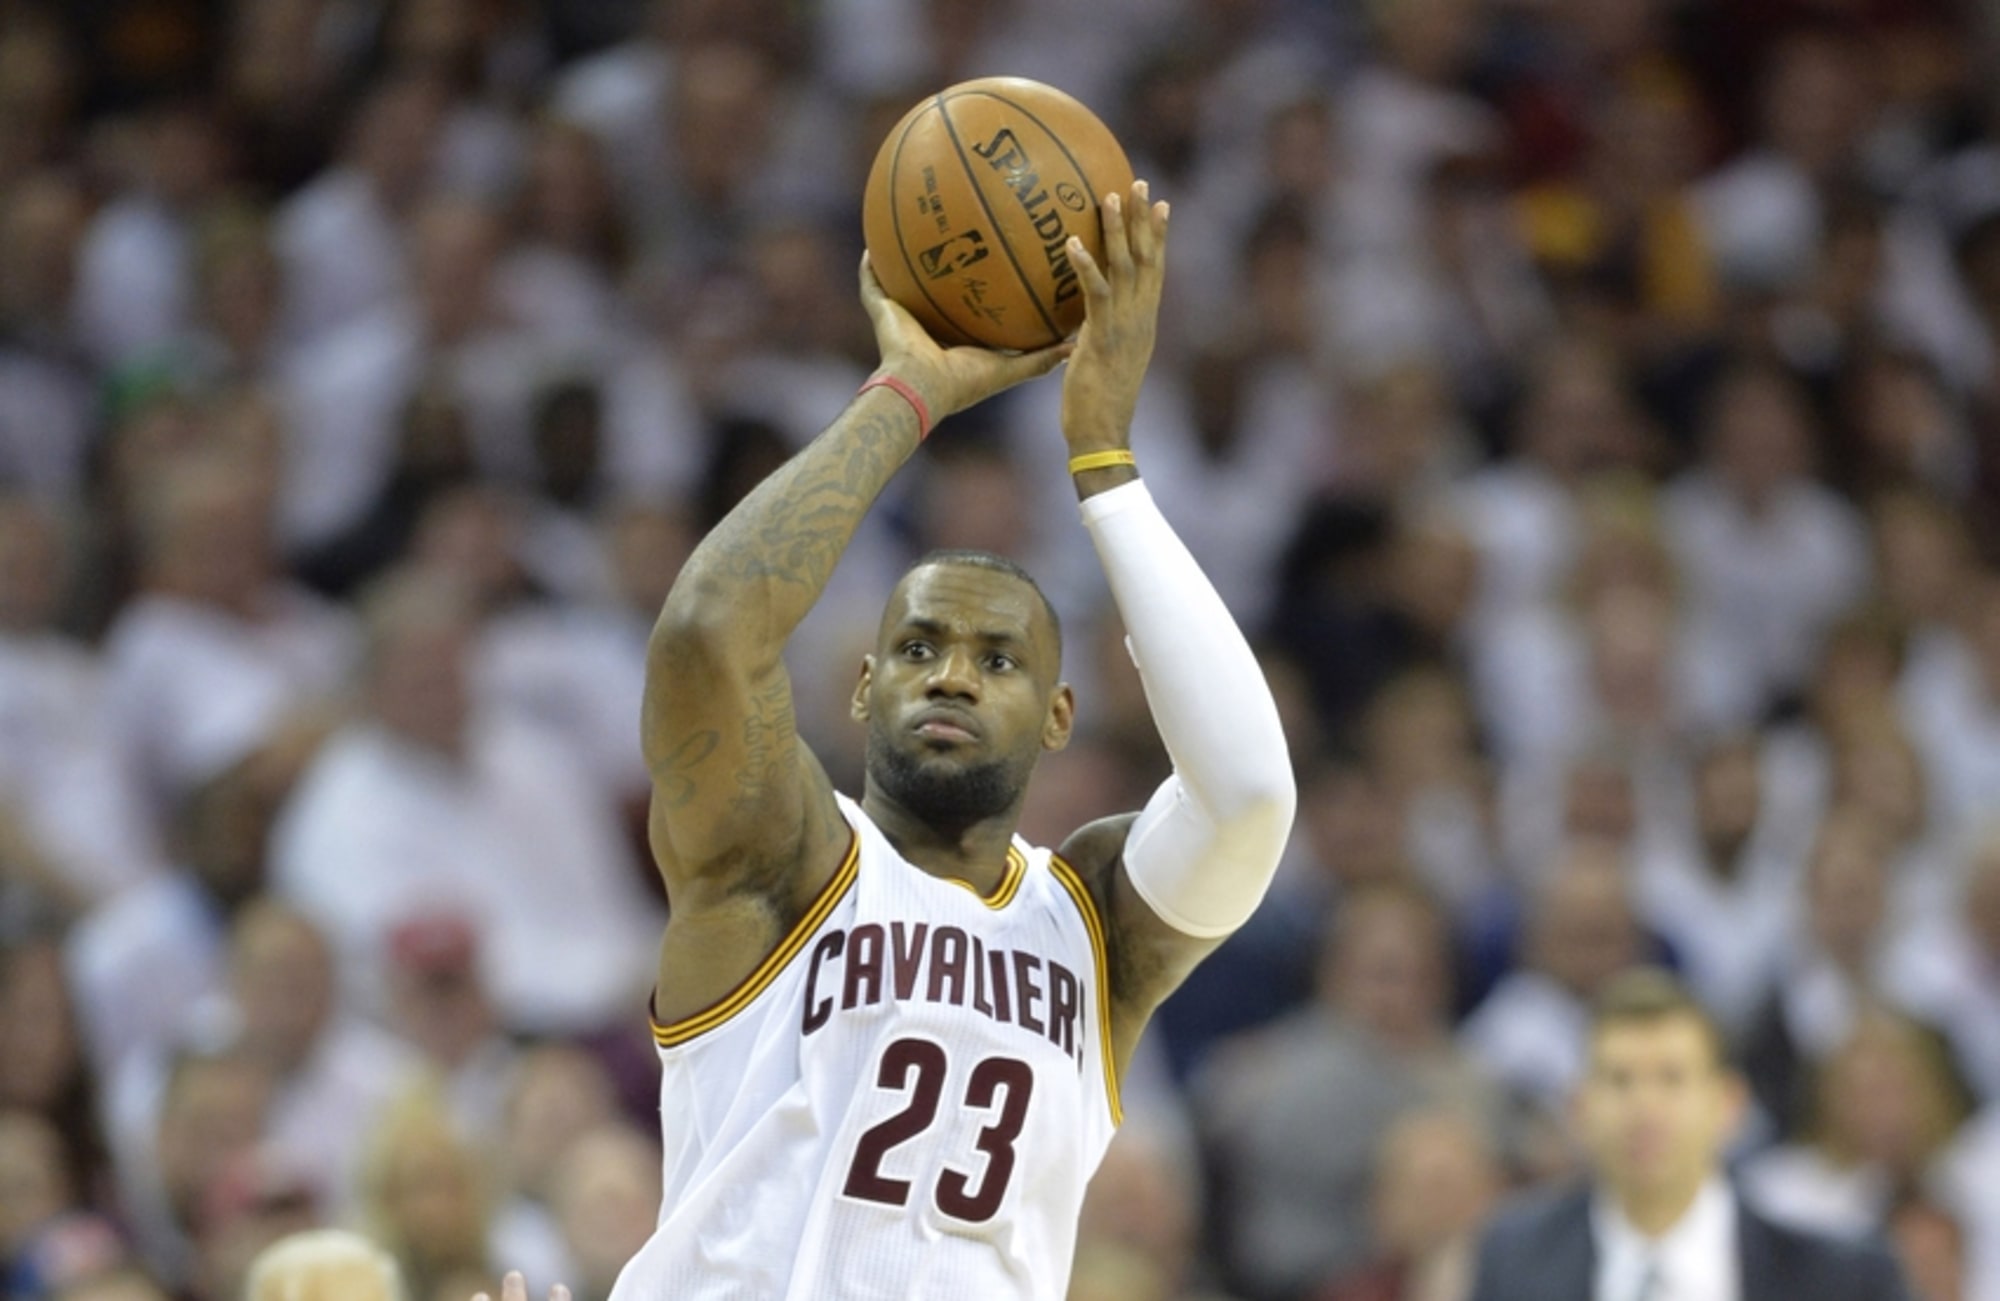 LeBron James drains a one handed shot from full court (Video)